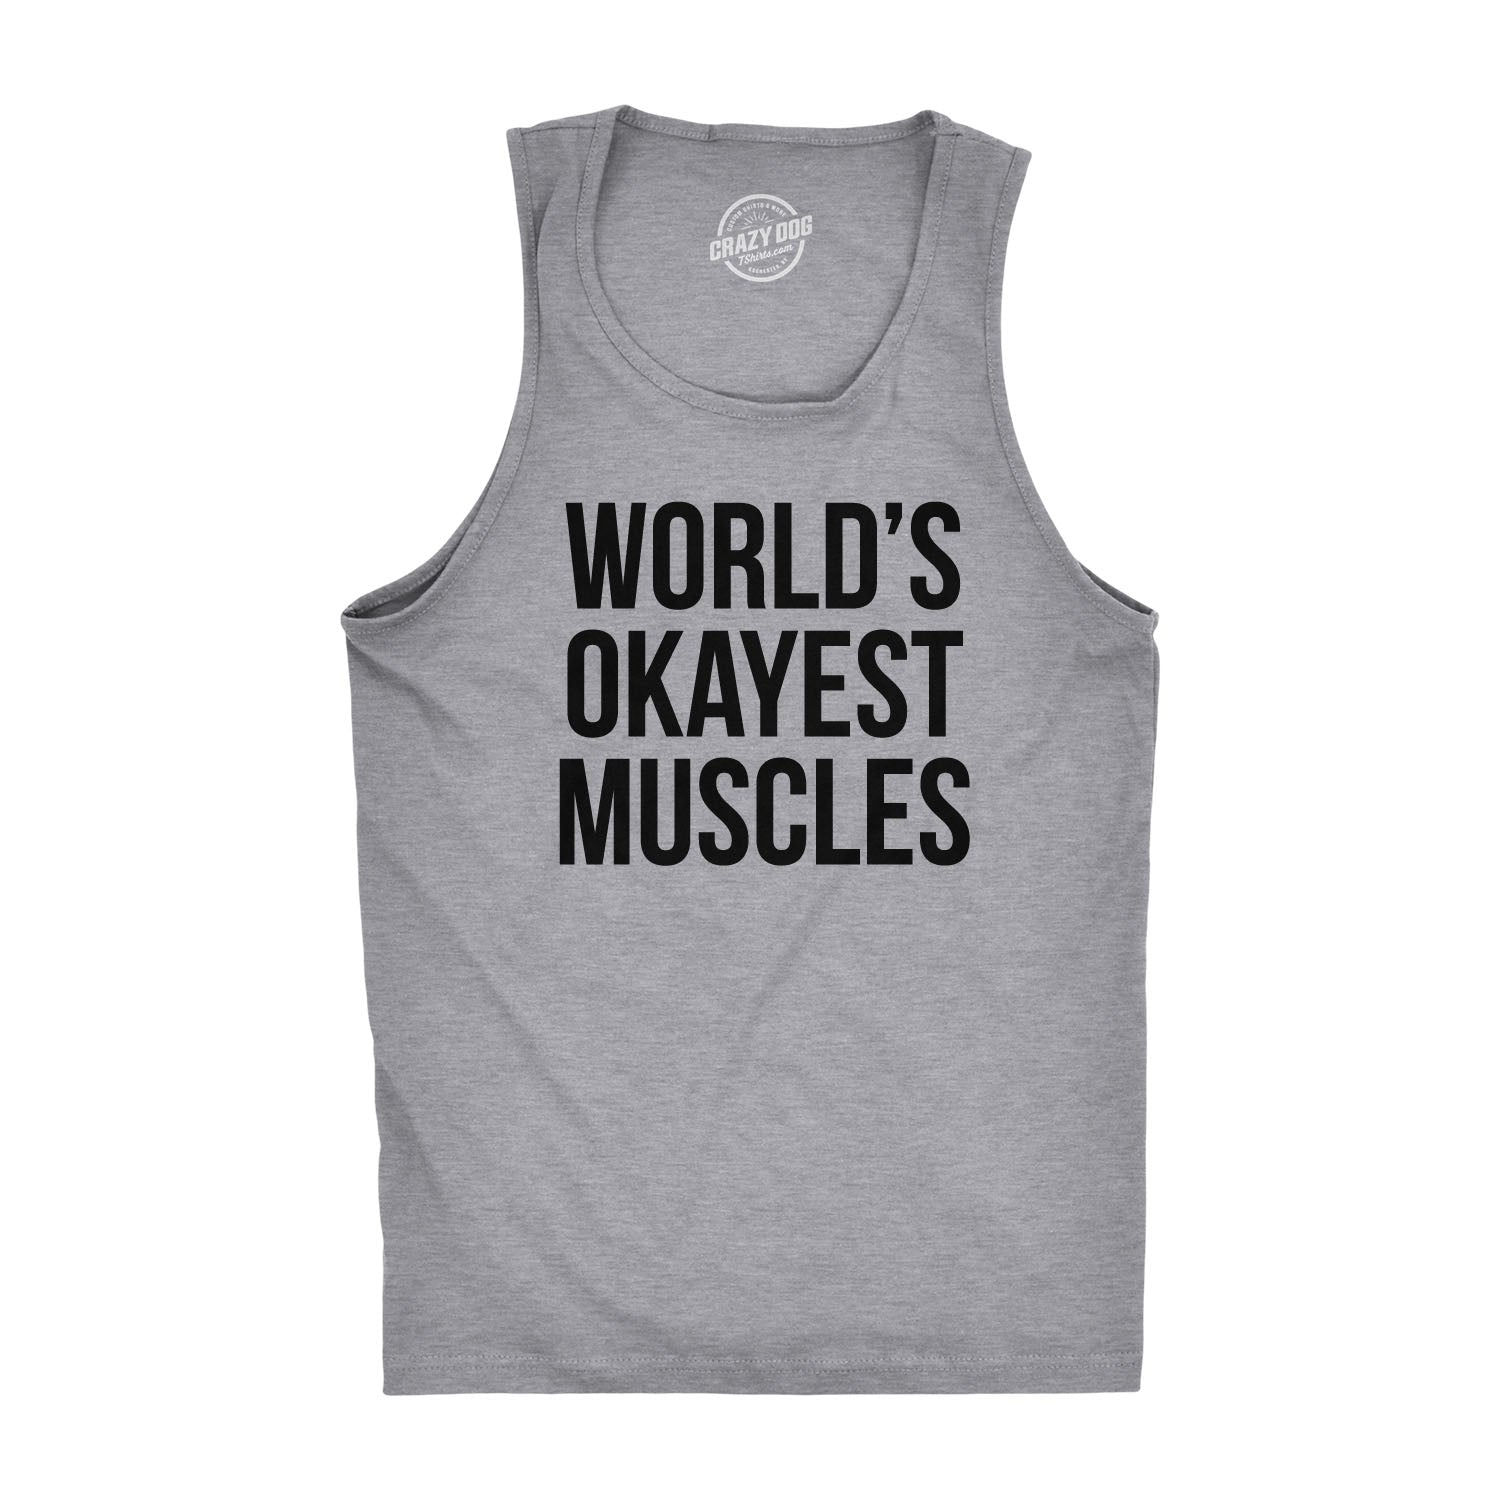 Funny Tank Tops, Cool Workout Tanks